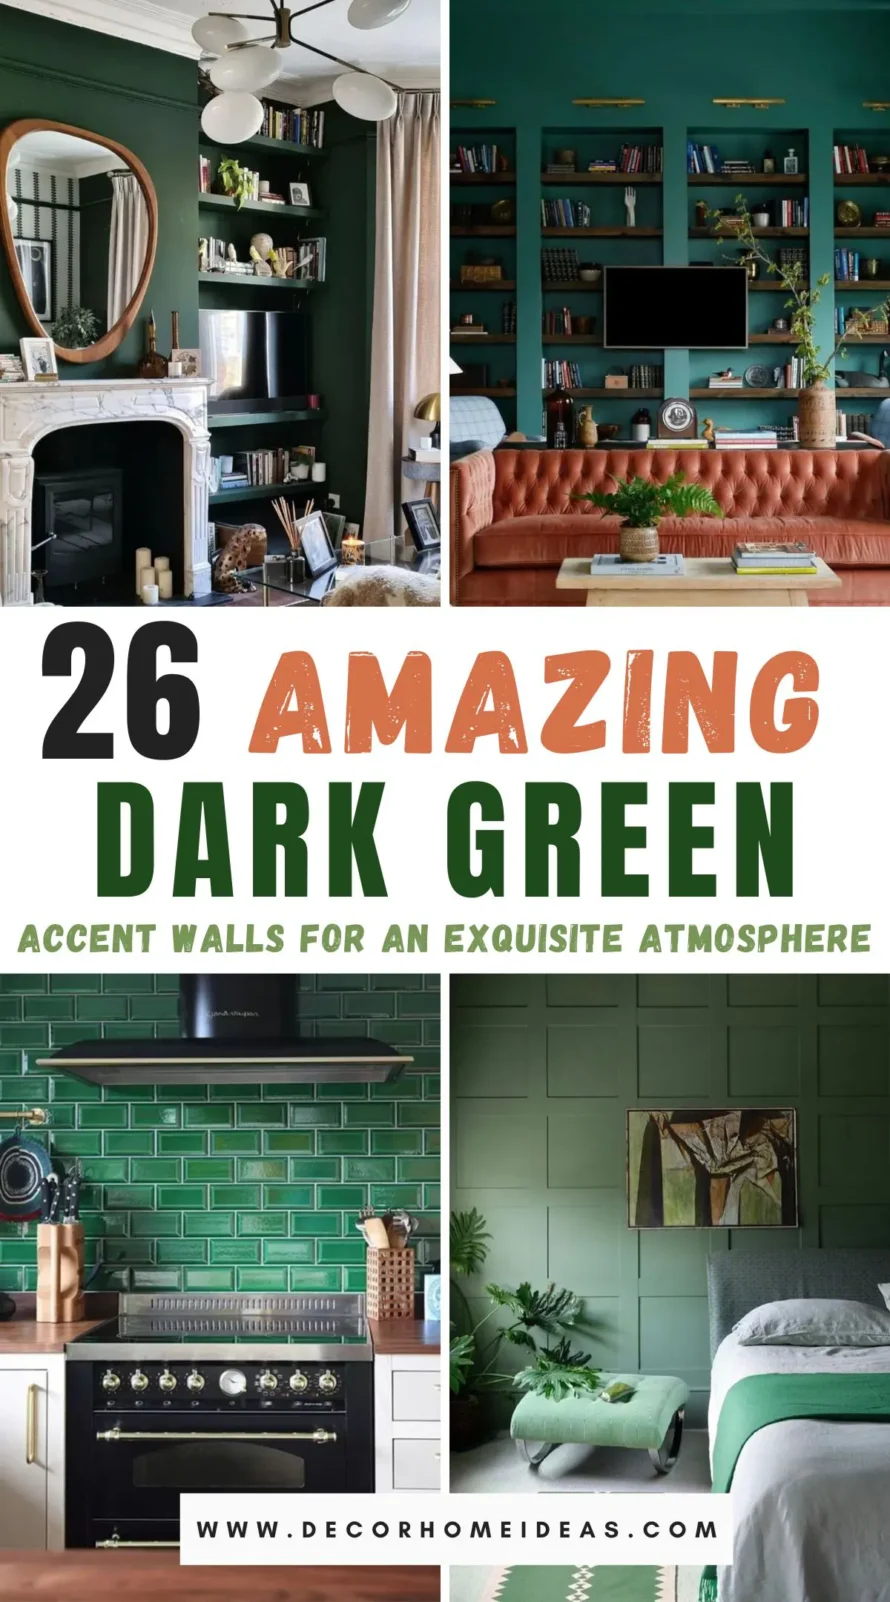 Discover the transformative power of dark green accent walls with our list of 26 enchanting designs. Each one promises to elevate your space with an air of sophistication and a touch of nature's serenity. Dive into the allure of exquisite atmospheres!